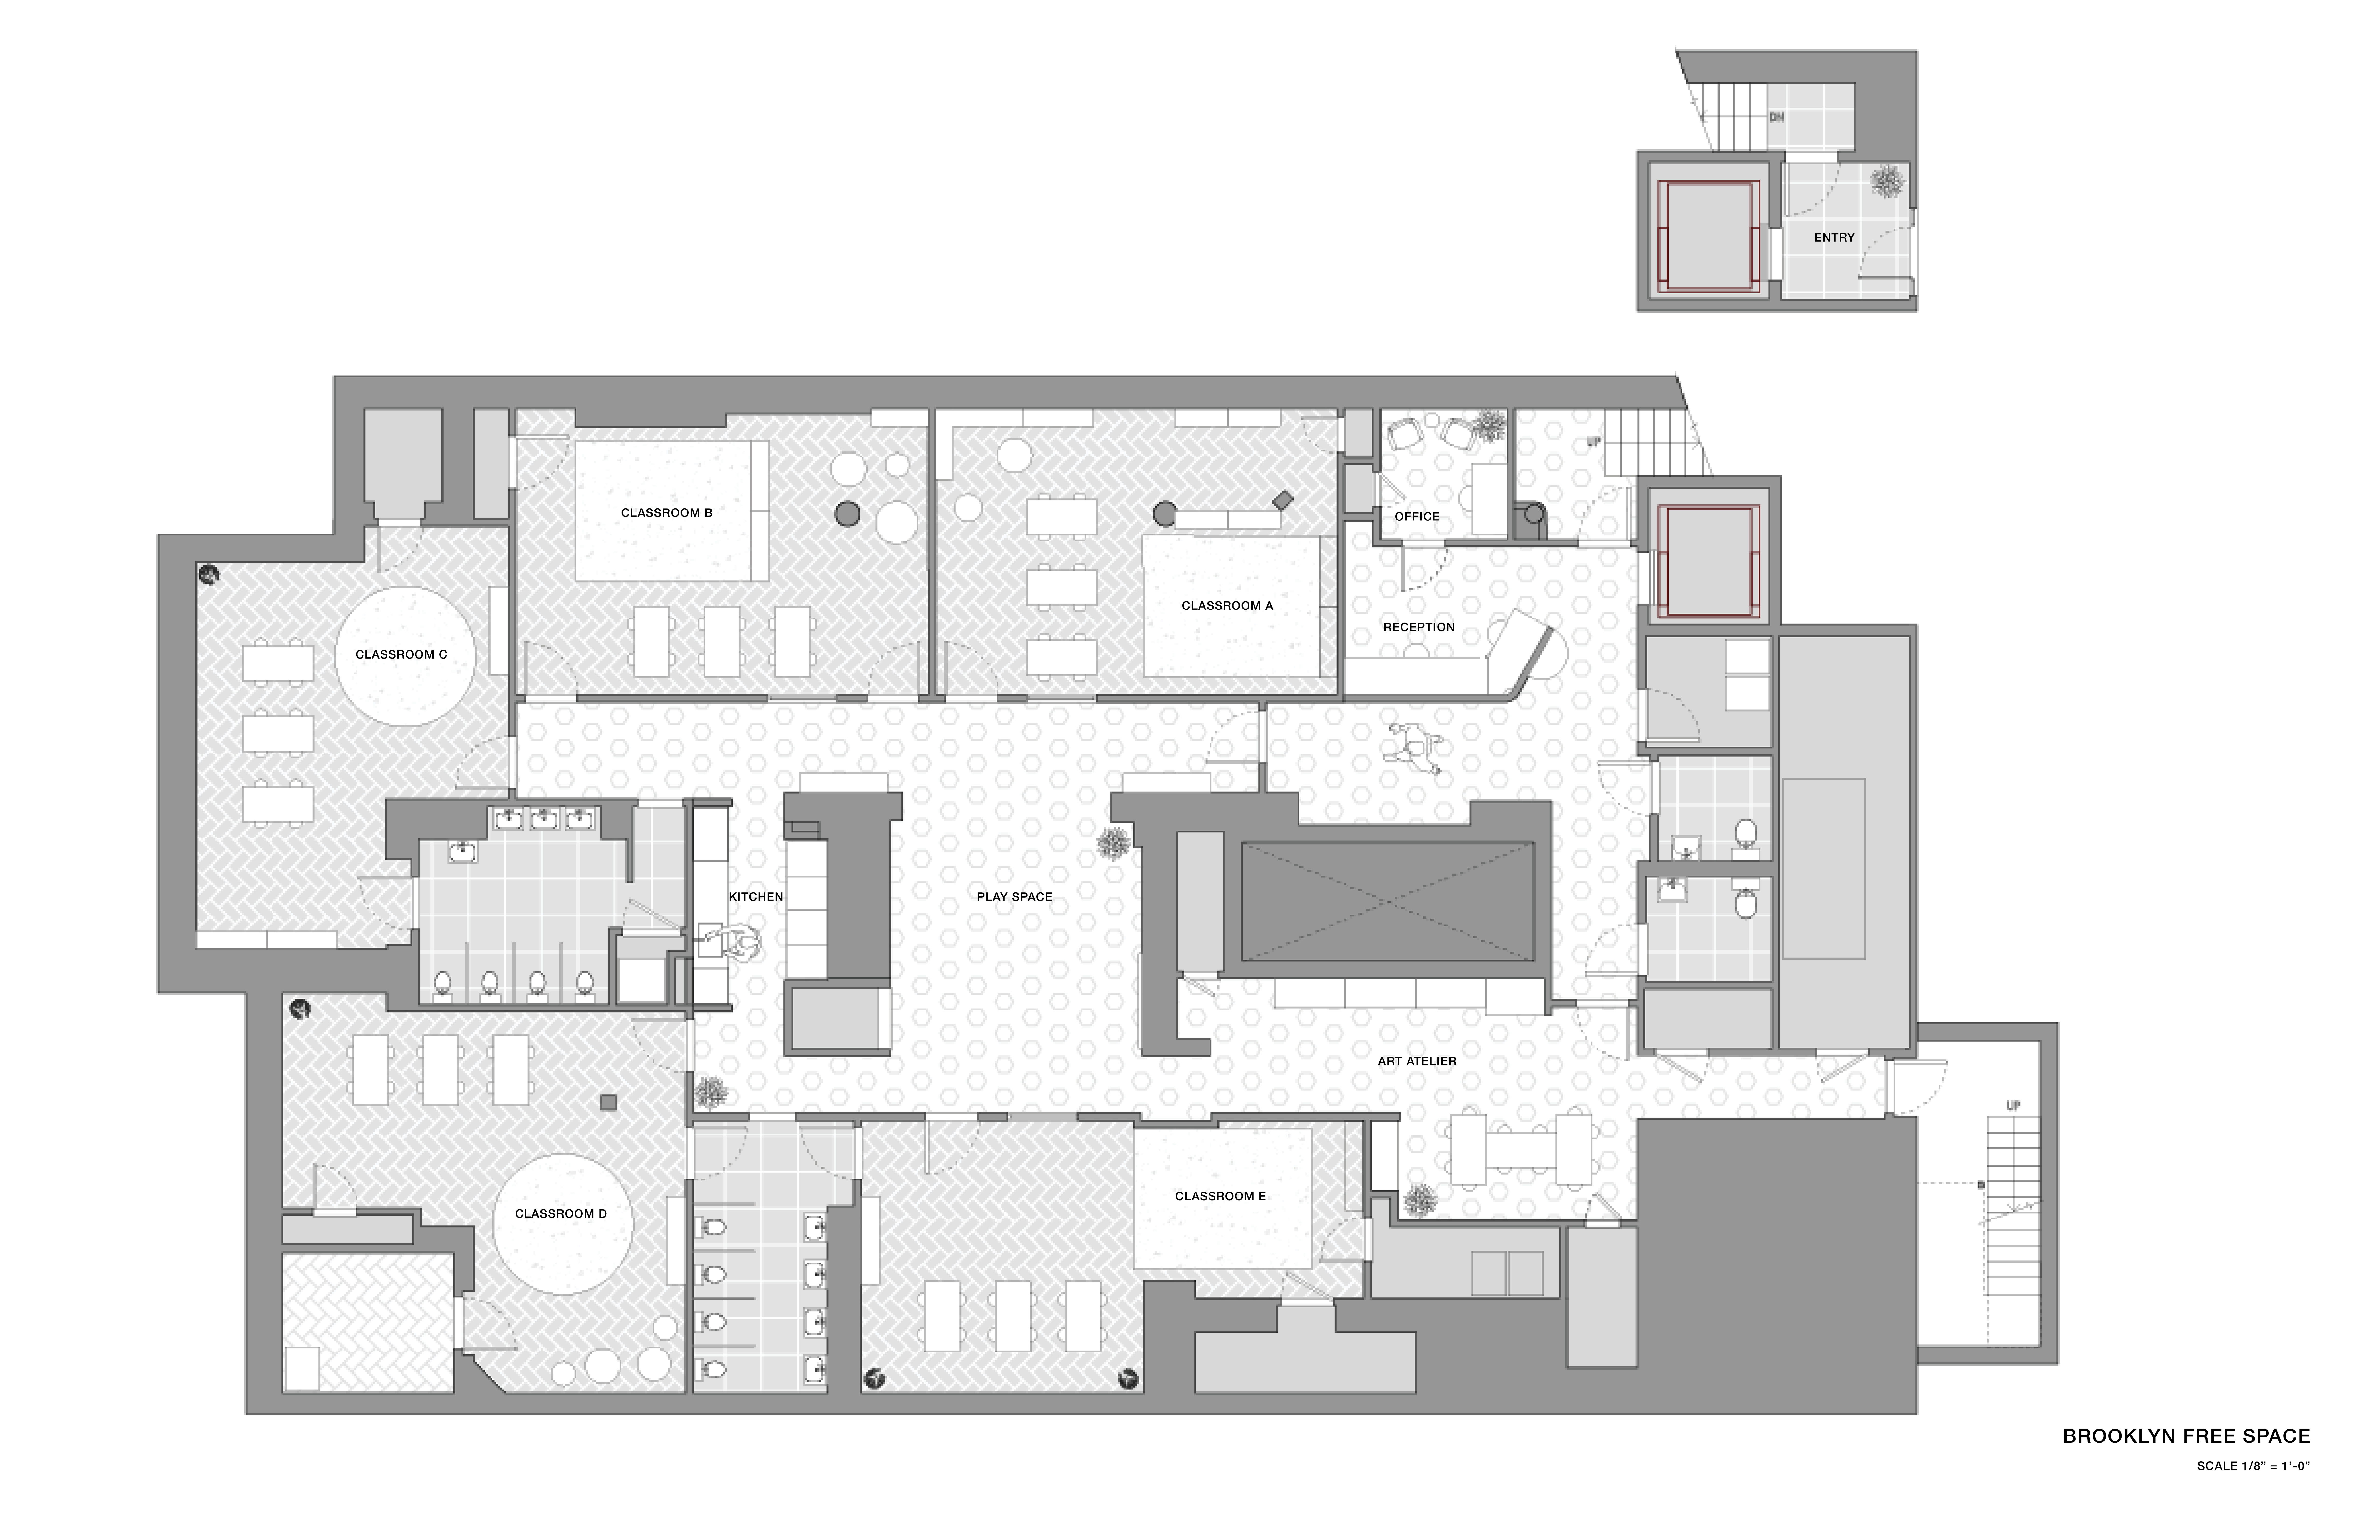 Floor plan courtesy Frederick Tang Architecture